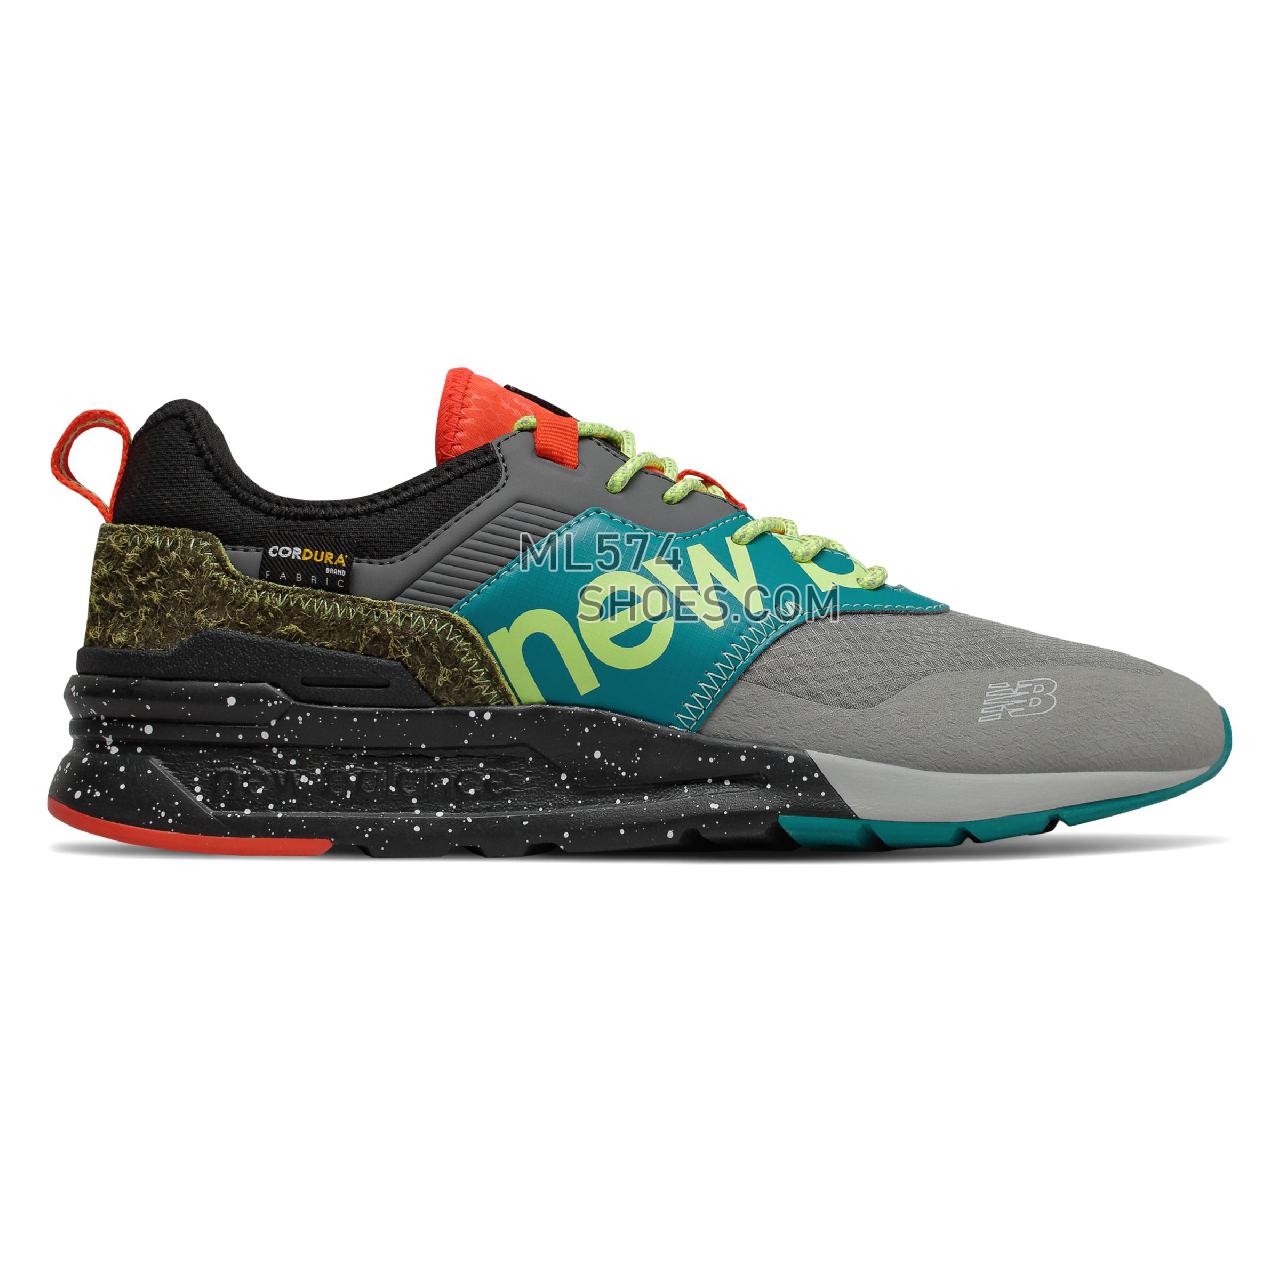 New Balance 997H Spring Hike Trail - Men's 997H Spring Hike Trail Classic - Team Away Grey with Neo Flame - CMT997HB